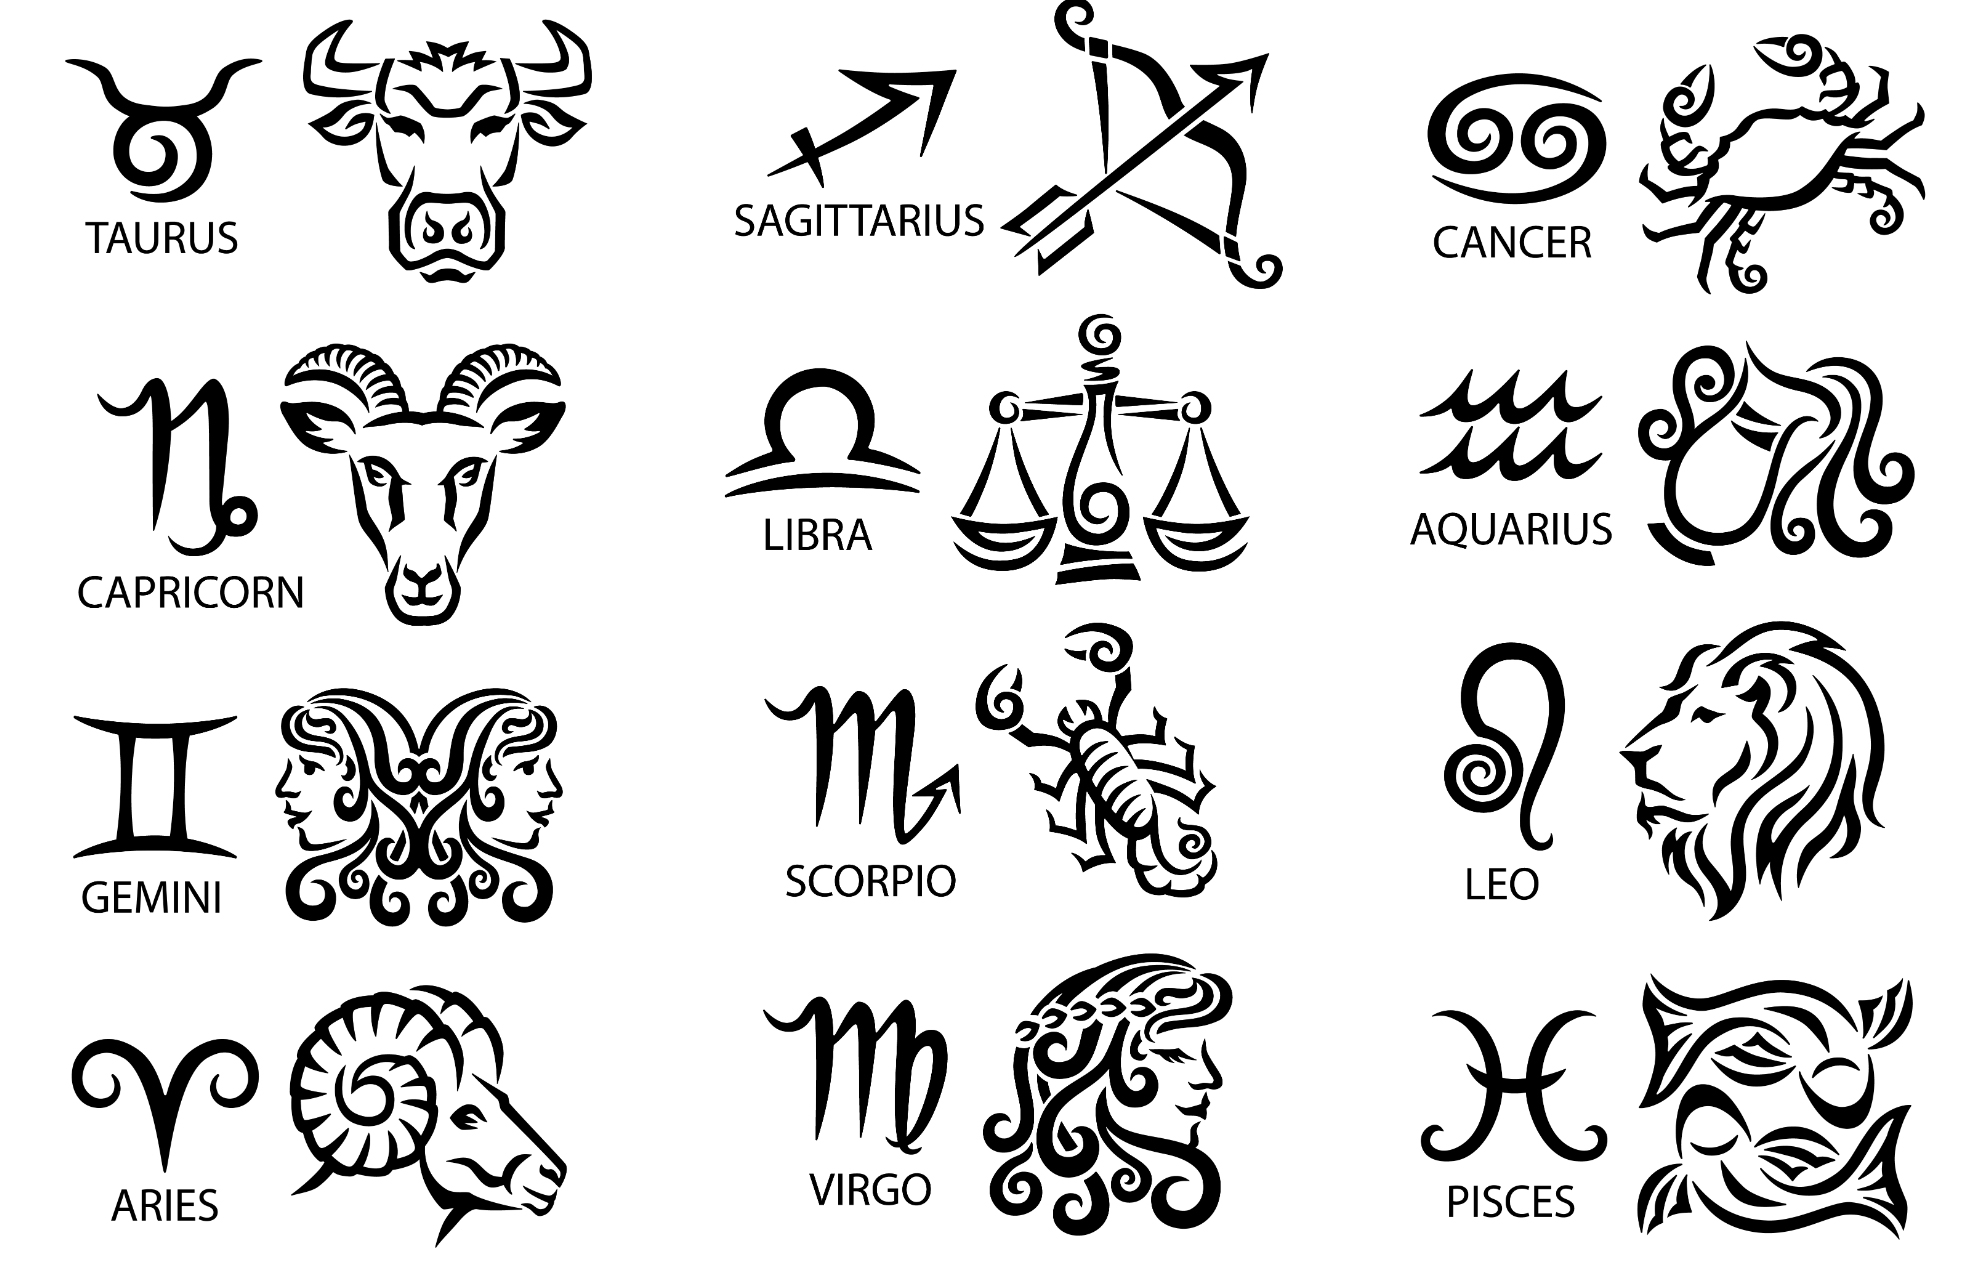 What Are The Dates For Each Zodiac sign? - MidwestBeads